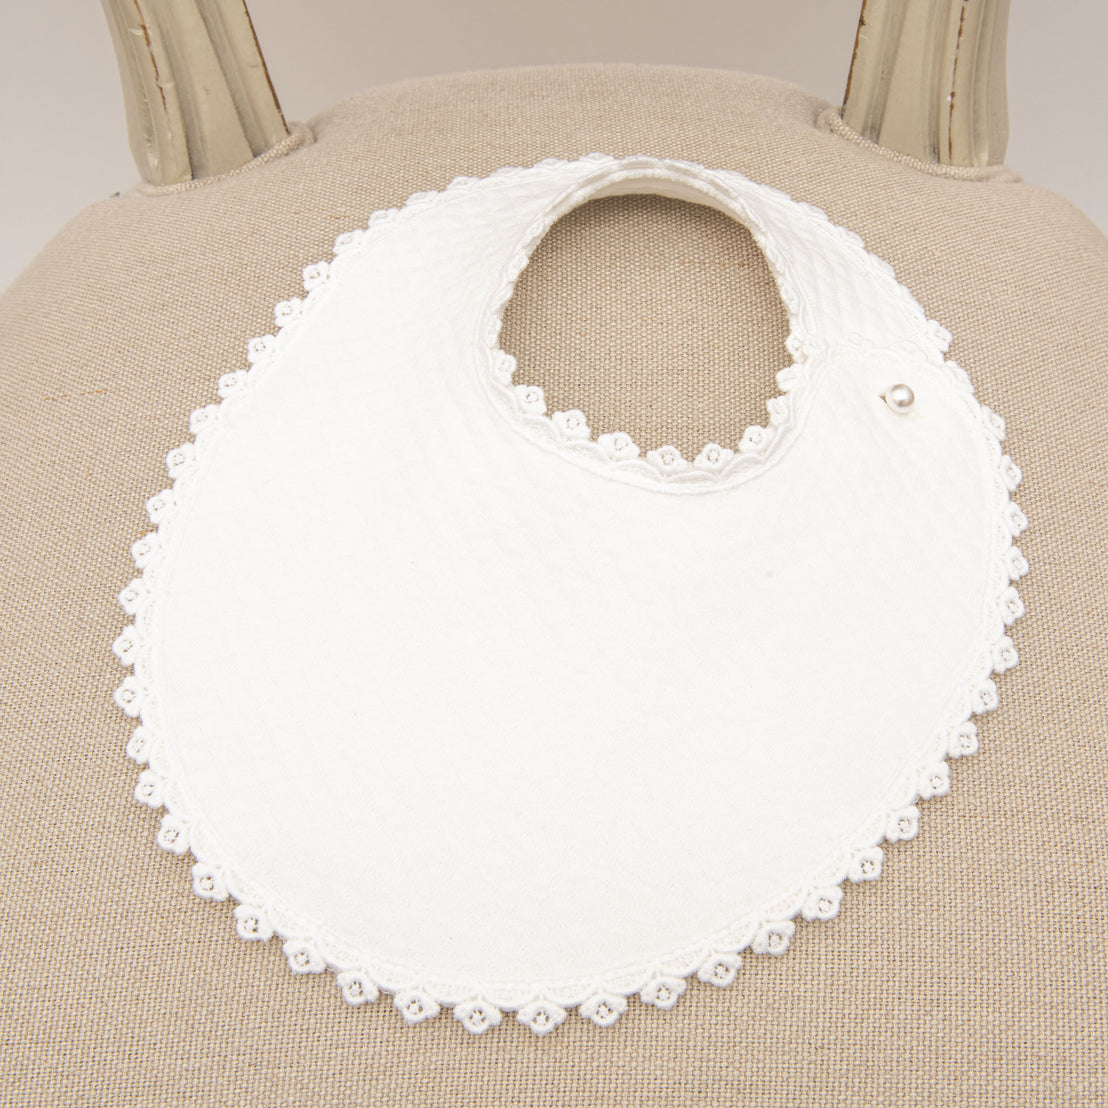 A close-up of a June Bib, displayed on a beige chair. The bib features a rounded neckline, a snap button closure, and a textured white quilted cotton material with delicate Venice lace trim.